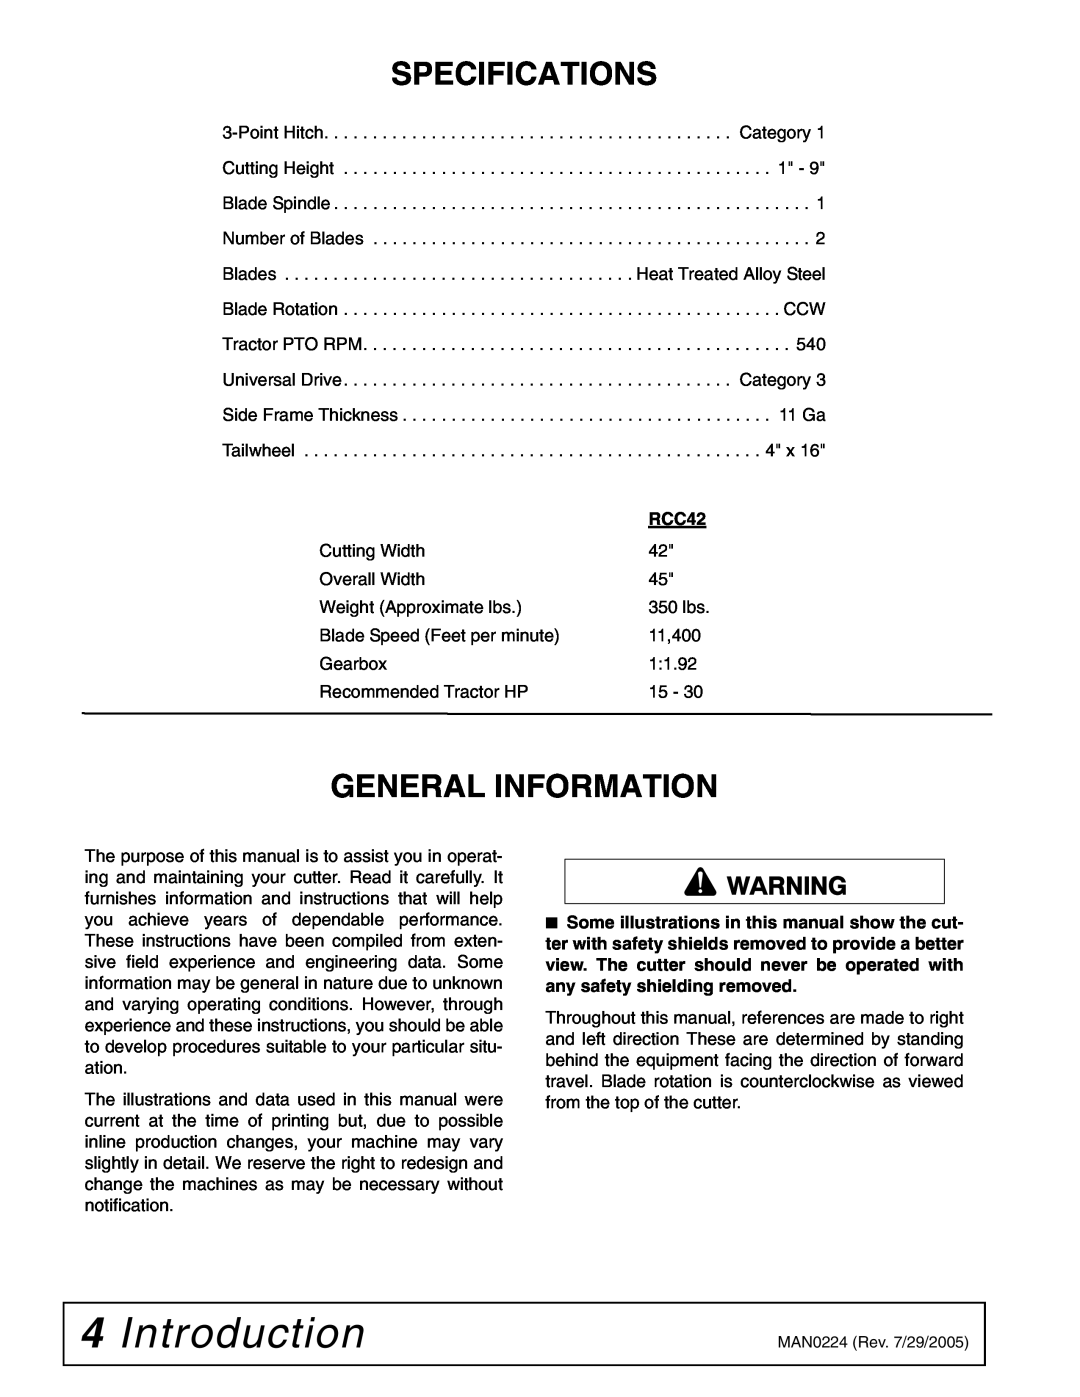 Woods Equipment RCC42 manual Introduction, Specifications, General Information 